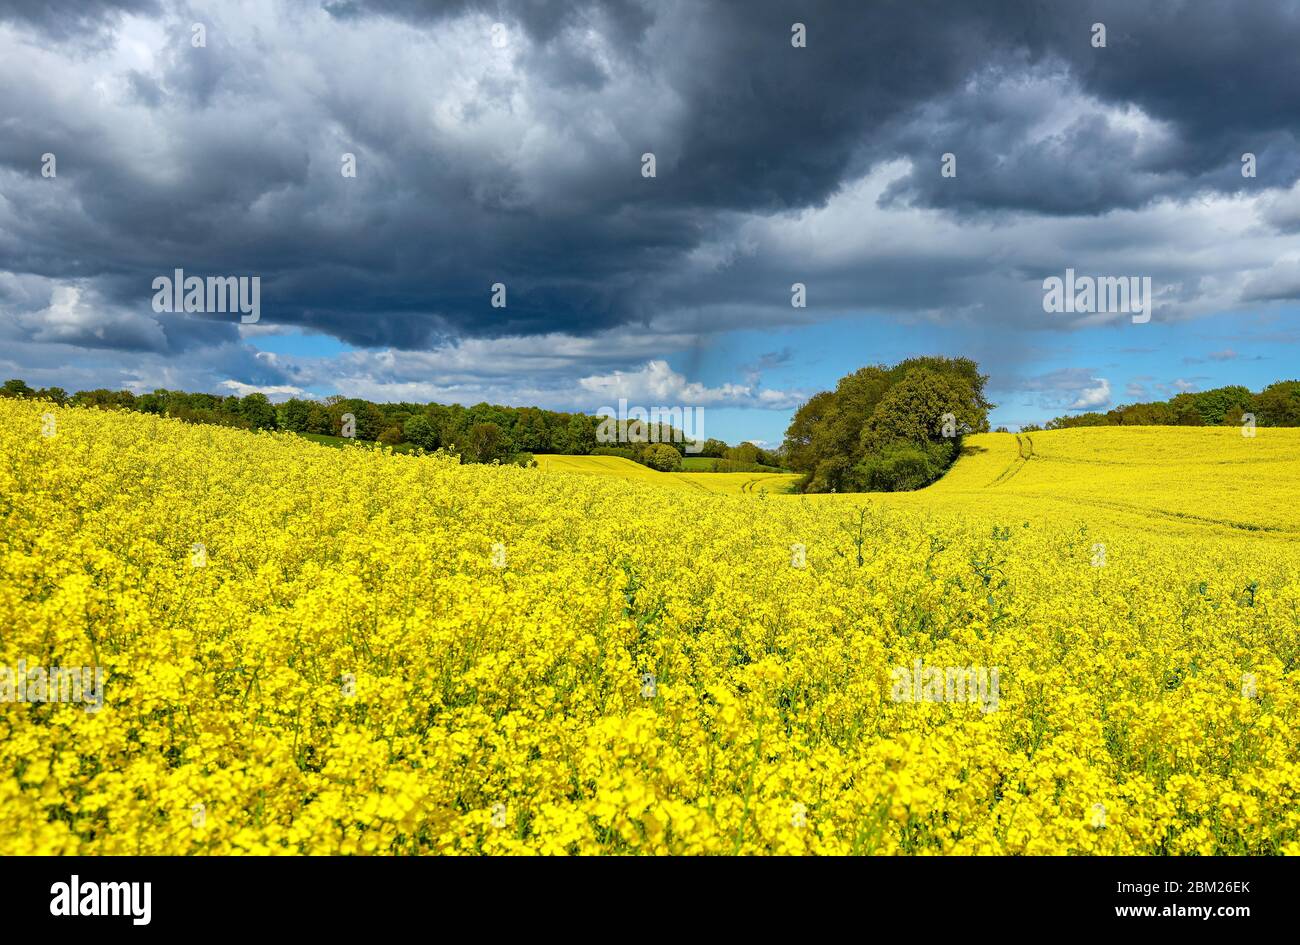 Schleswig-Holstein, Germany, is known for these beautiful yellow rapeseed fields in spring. Stock Photo